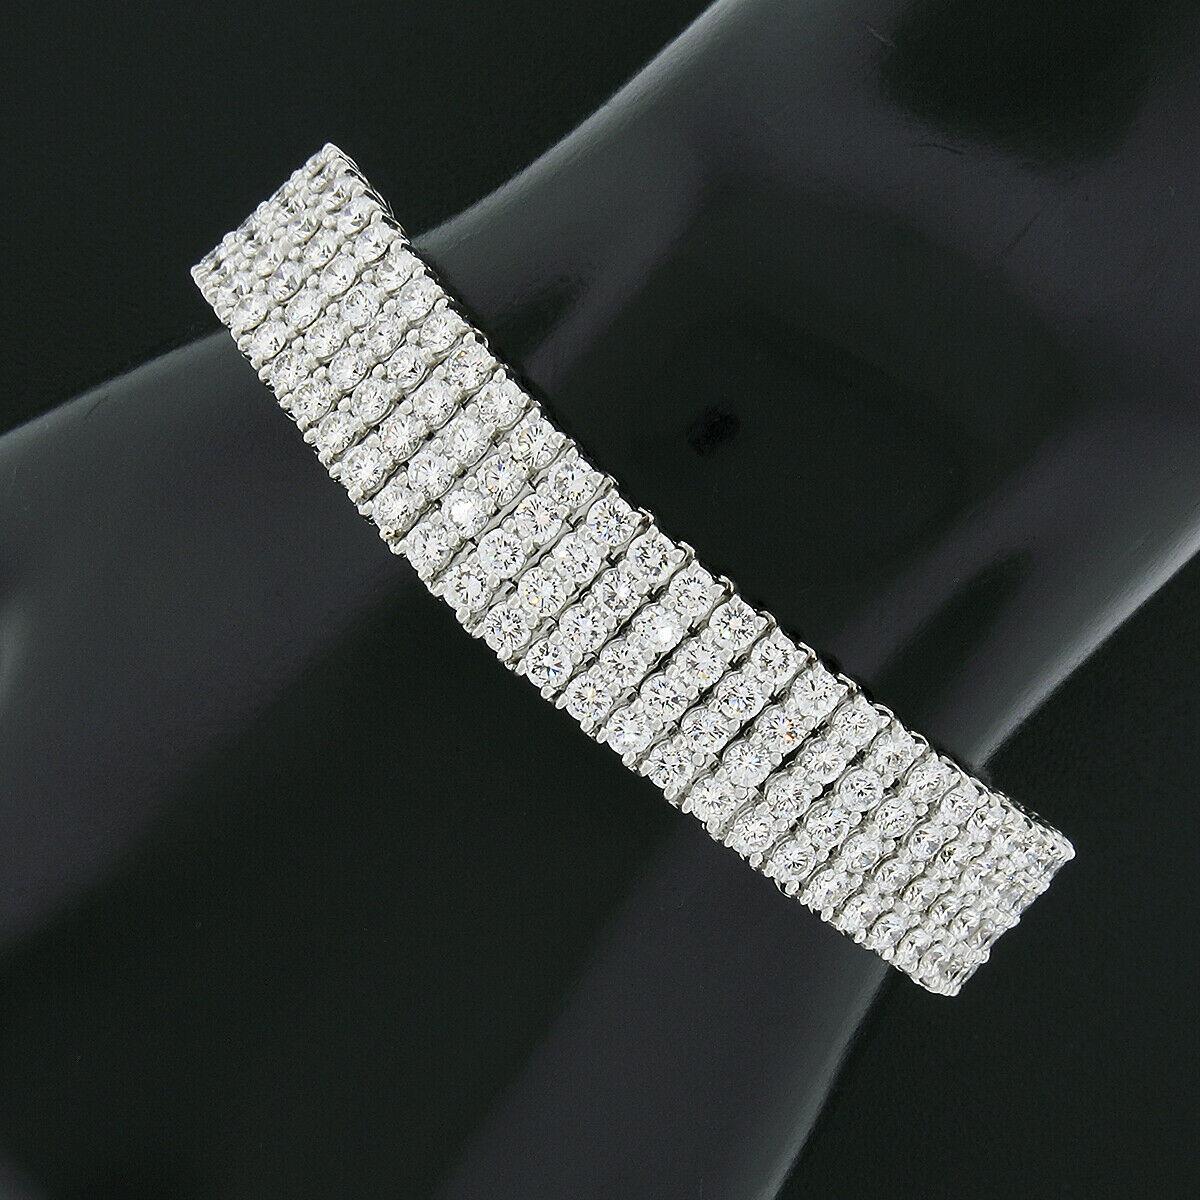 Here we have an absolutely magnificent diamond strap tennis bracelet that was very well crafted from solid .950 platinum. This wide bracelet features 4 rows of very fine quality round brilliant cut diamonds in which are neatly shared-prong set